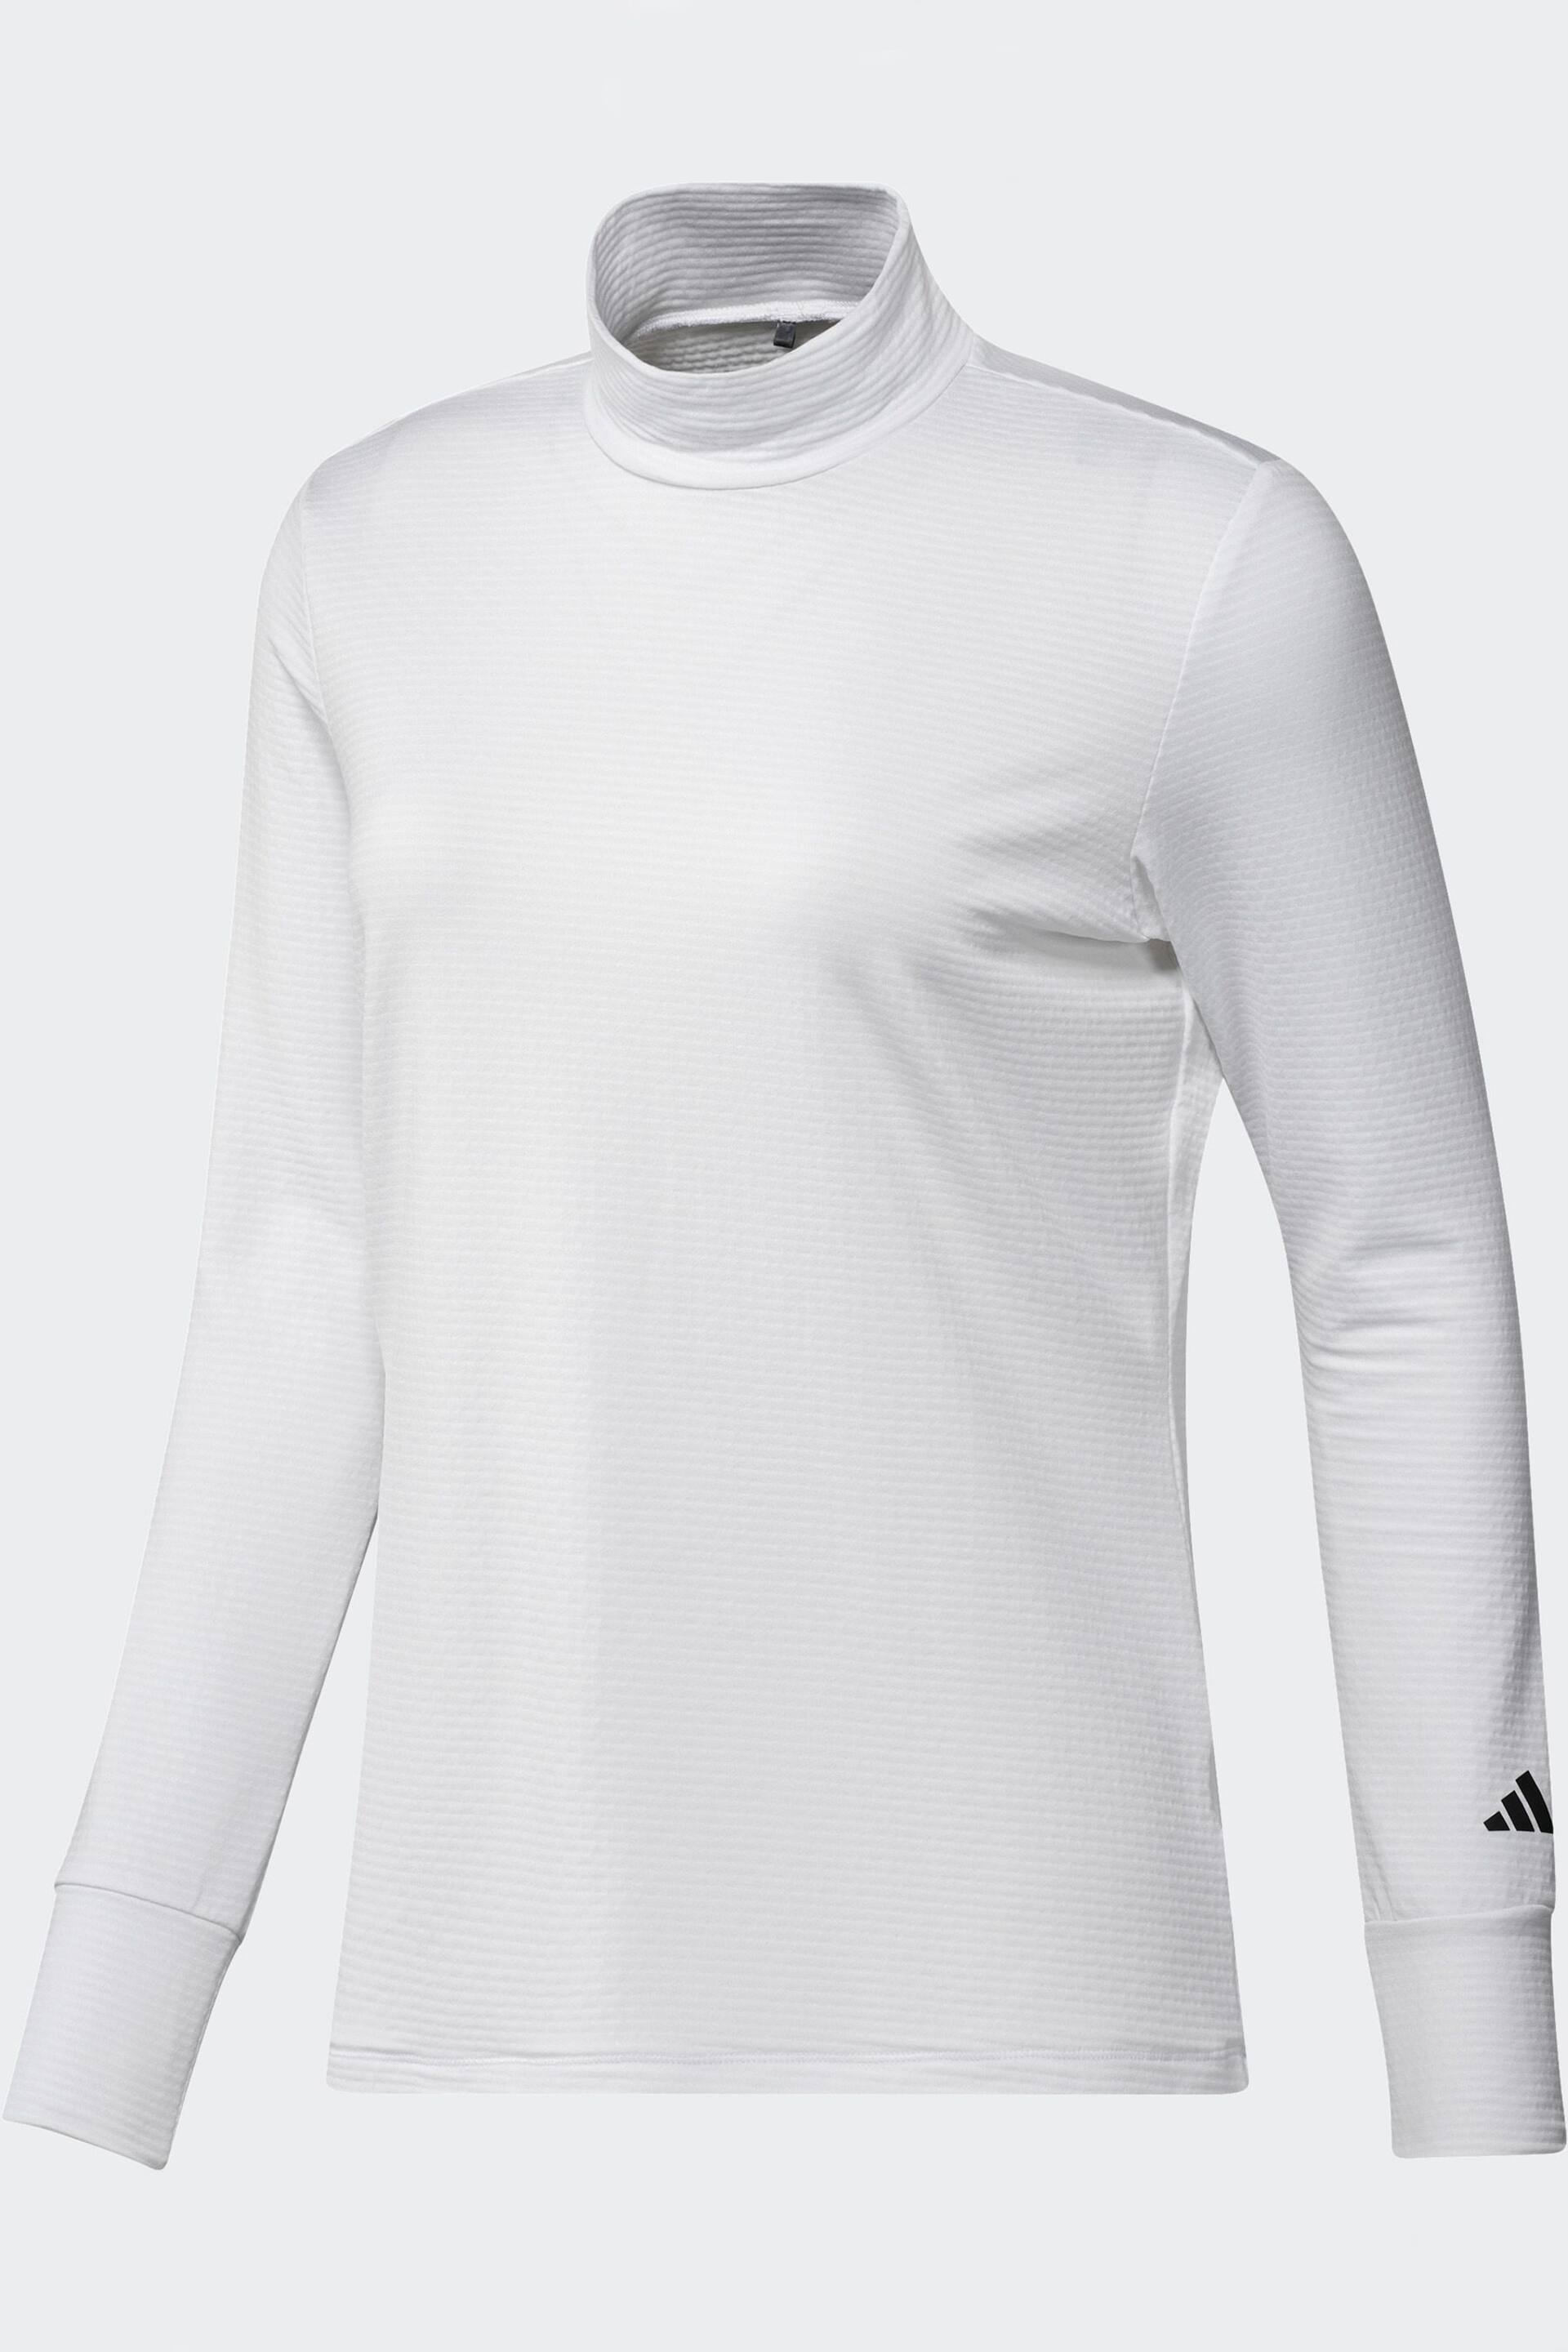 adidas Golf COLD.RDY Long Sleeve Mock T-shirt - Image 6 of 7